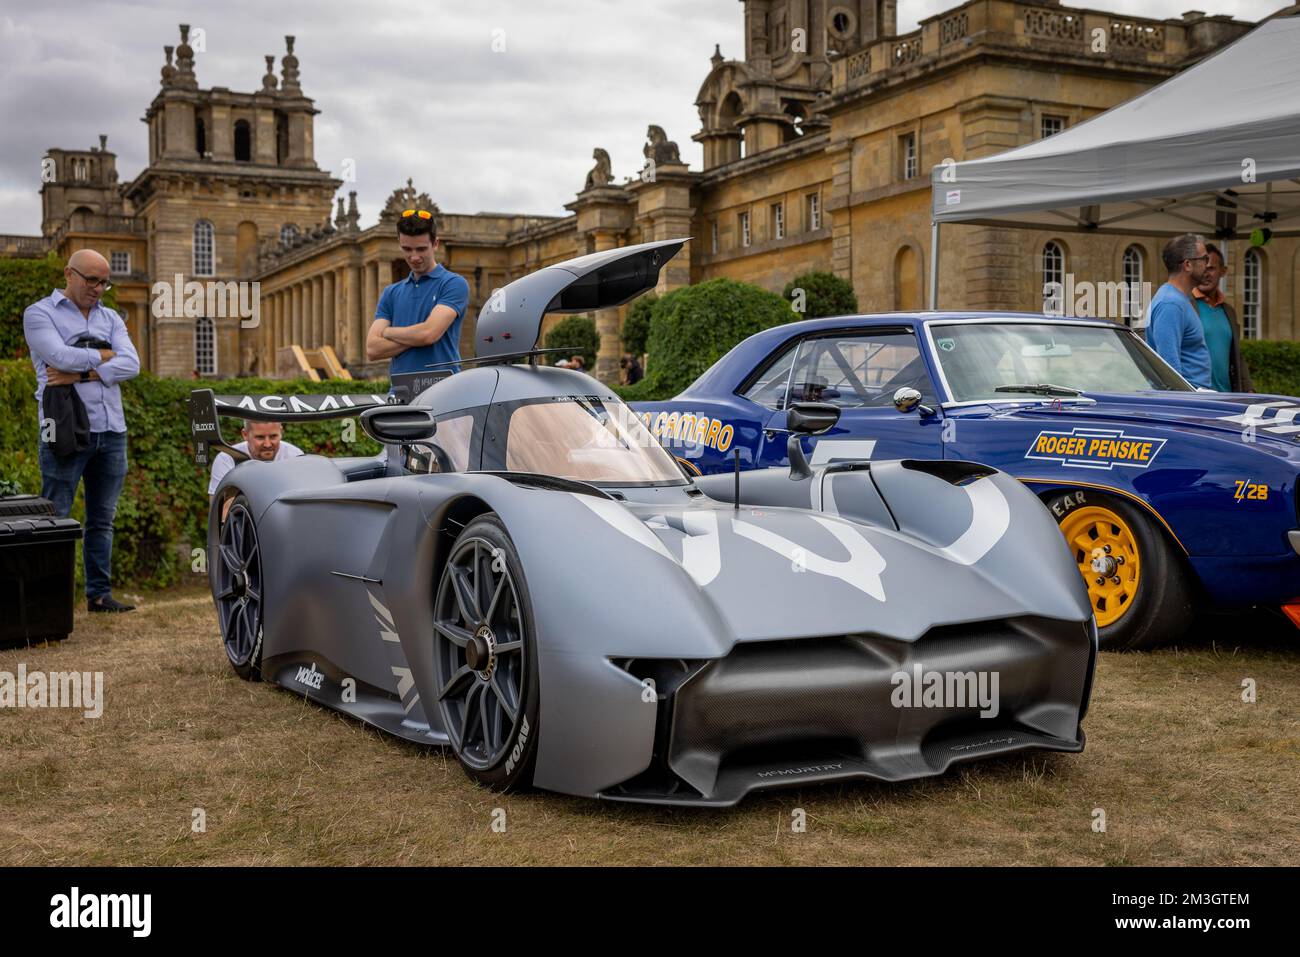 McMurtry Spéirling electric single-seat fan car on display at the Salon Privé motor show held at Blenheim Palace on the 4th September 2022 Stock Photo